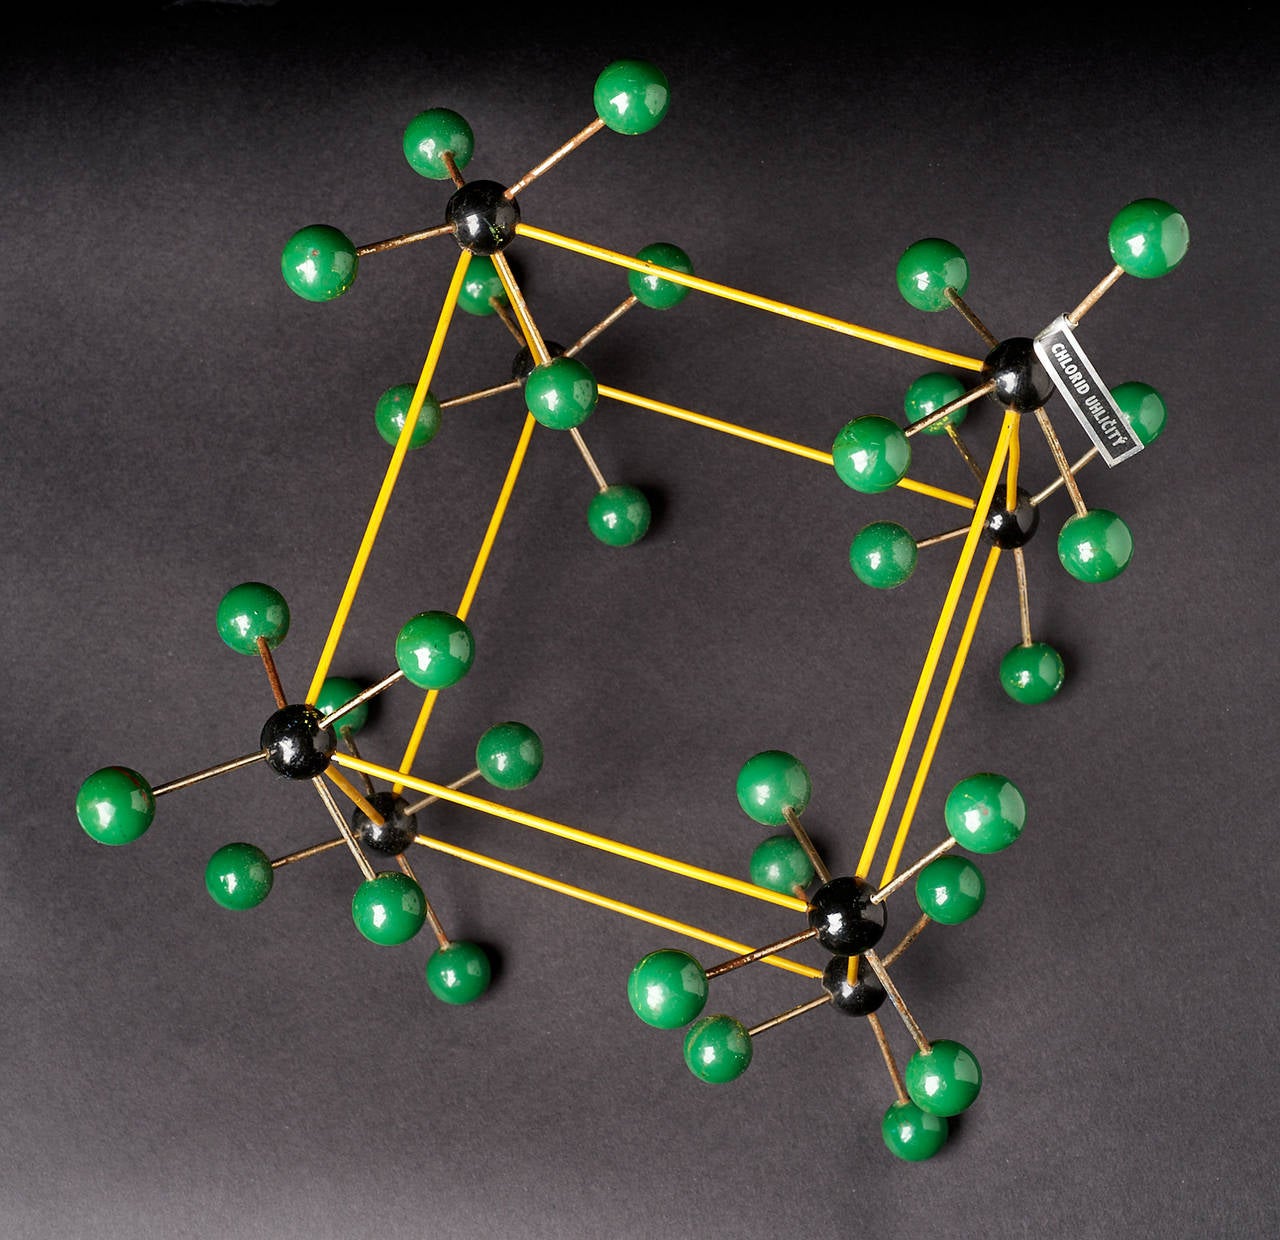 This beautiful patinated metal 1950s molecular structure of 